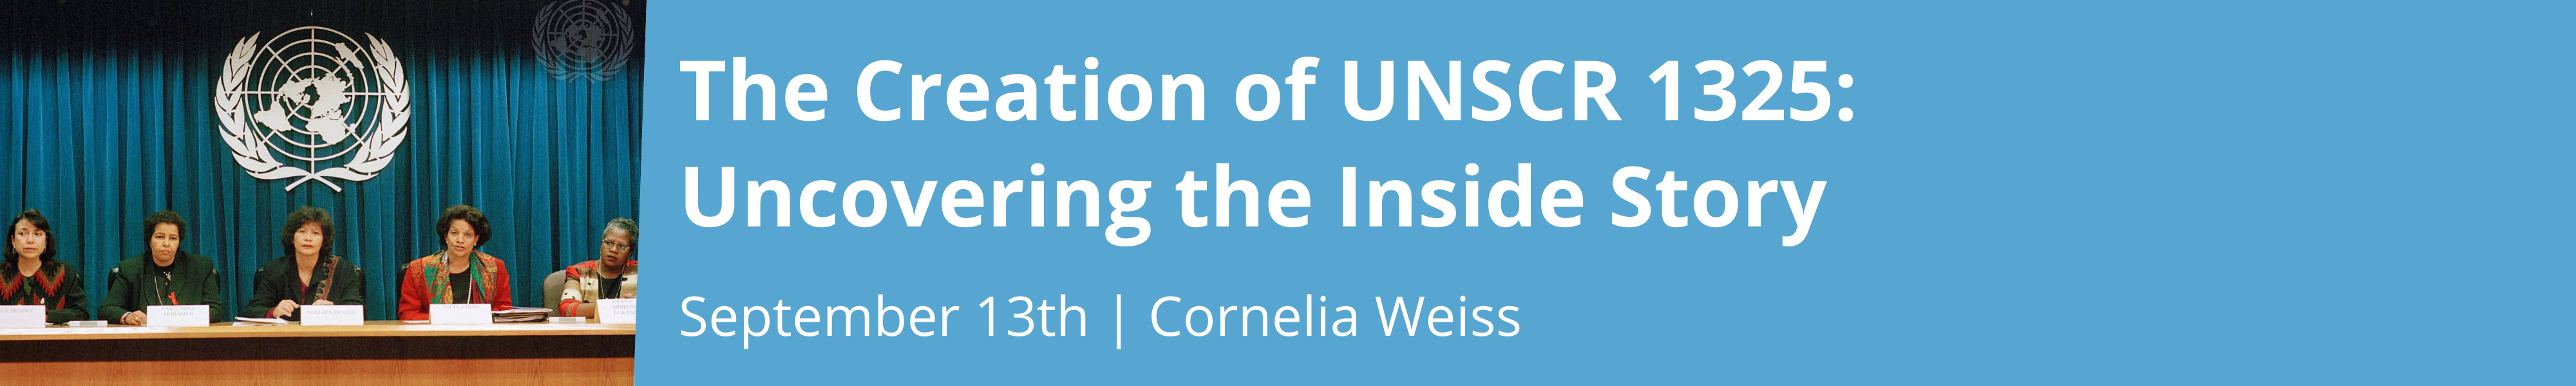 The Creation of UNSCR 1325: Uncovering the Inside Story